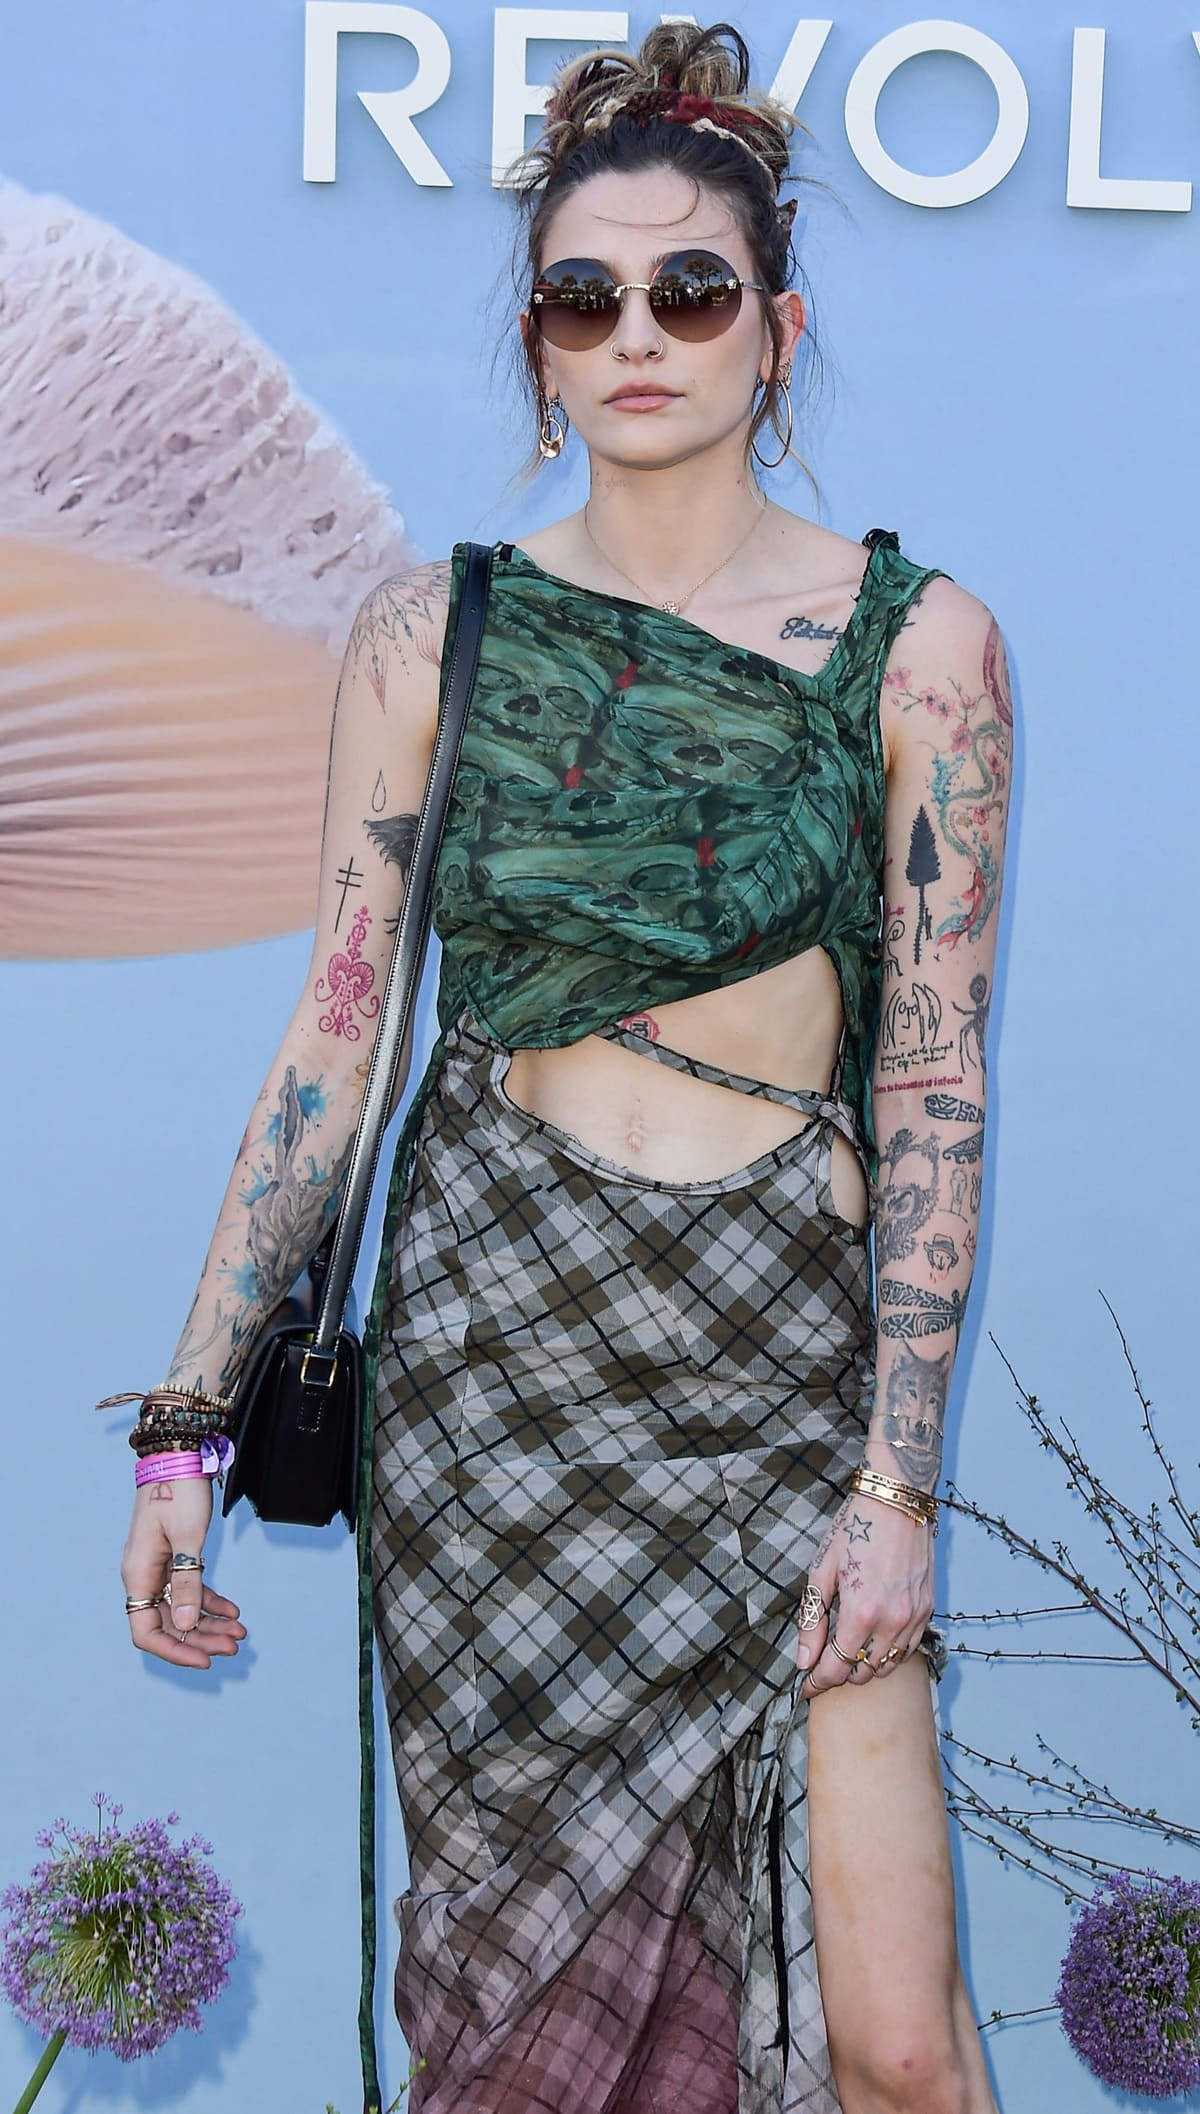 Paris Jackson sporting a green skulled pattern top with a midi dress featuring ruched detailing and a waist-high cutout from Ottolinger